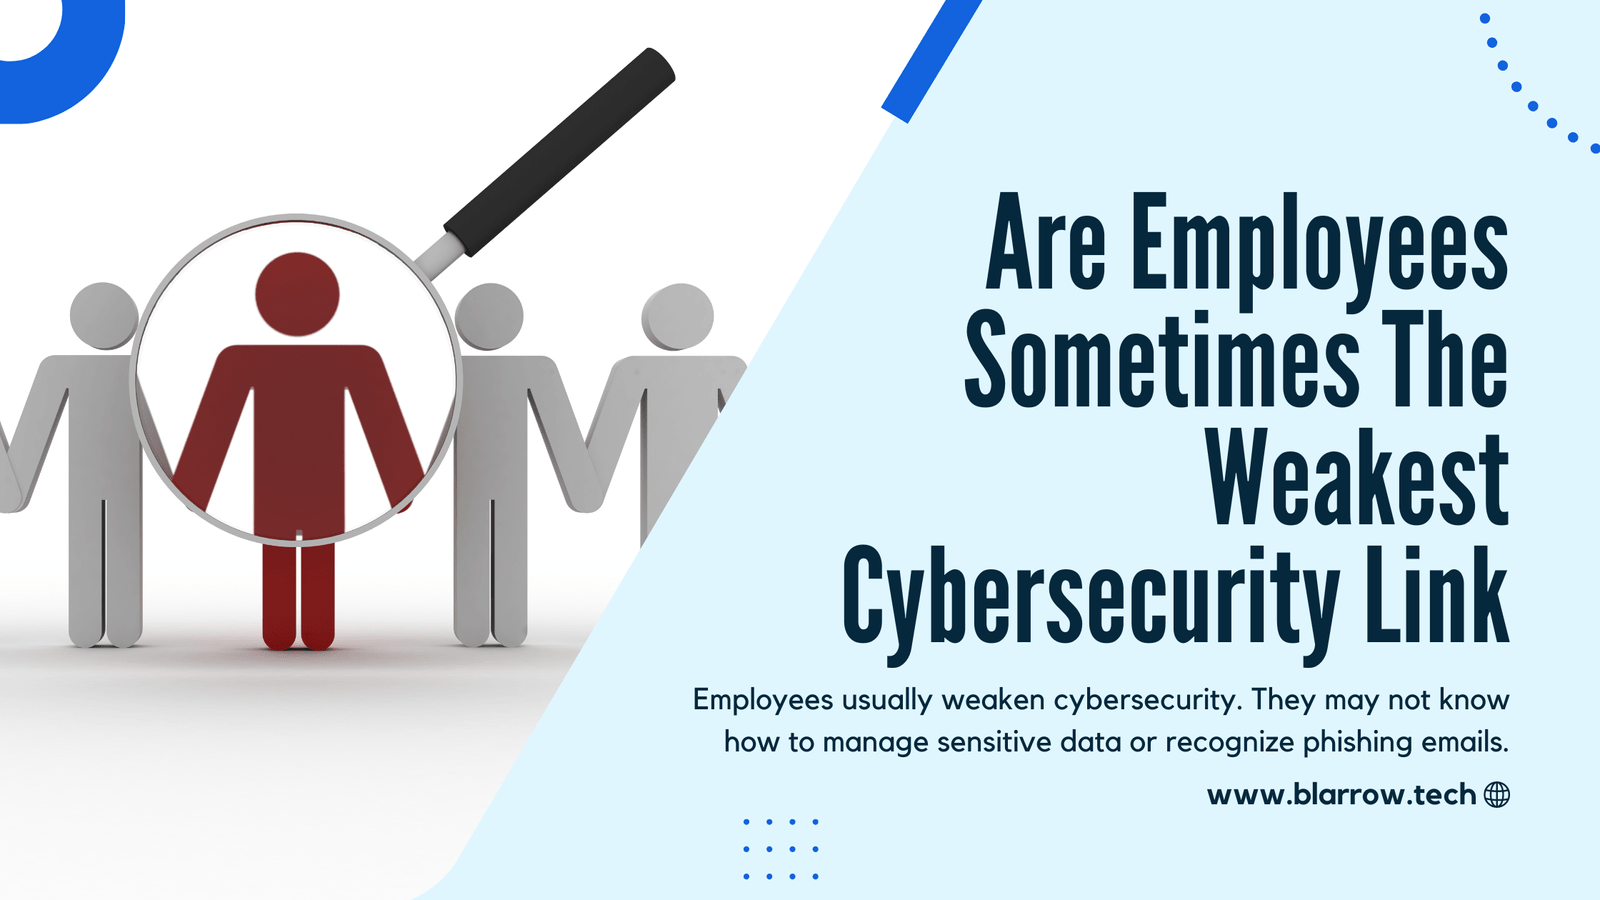 Are Employees Sometimes The Weakest Cybersecurity Link